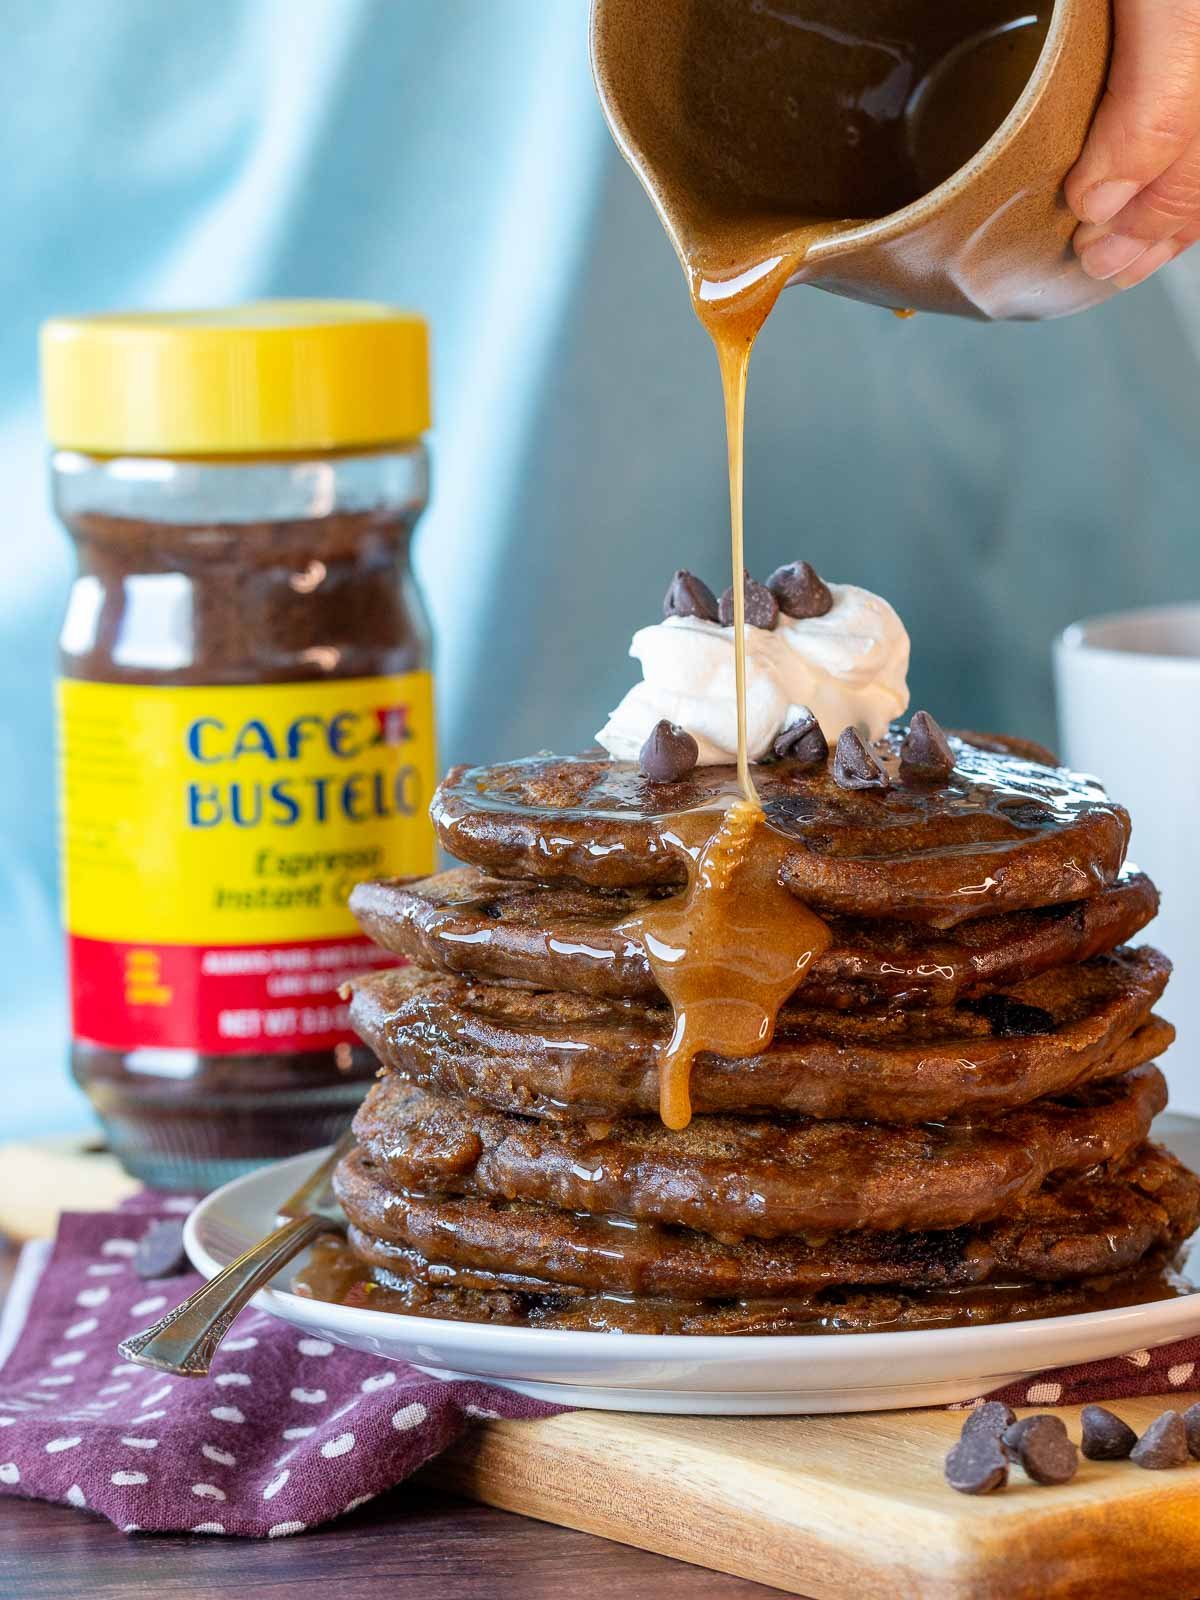 Maple coffee syrup getting poured over a stack of pancakes with coffee and chocolate chips.